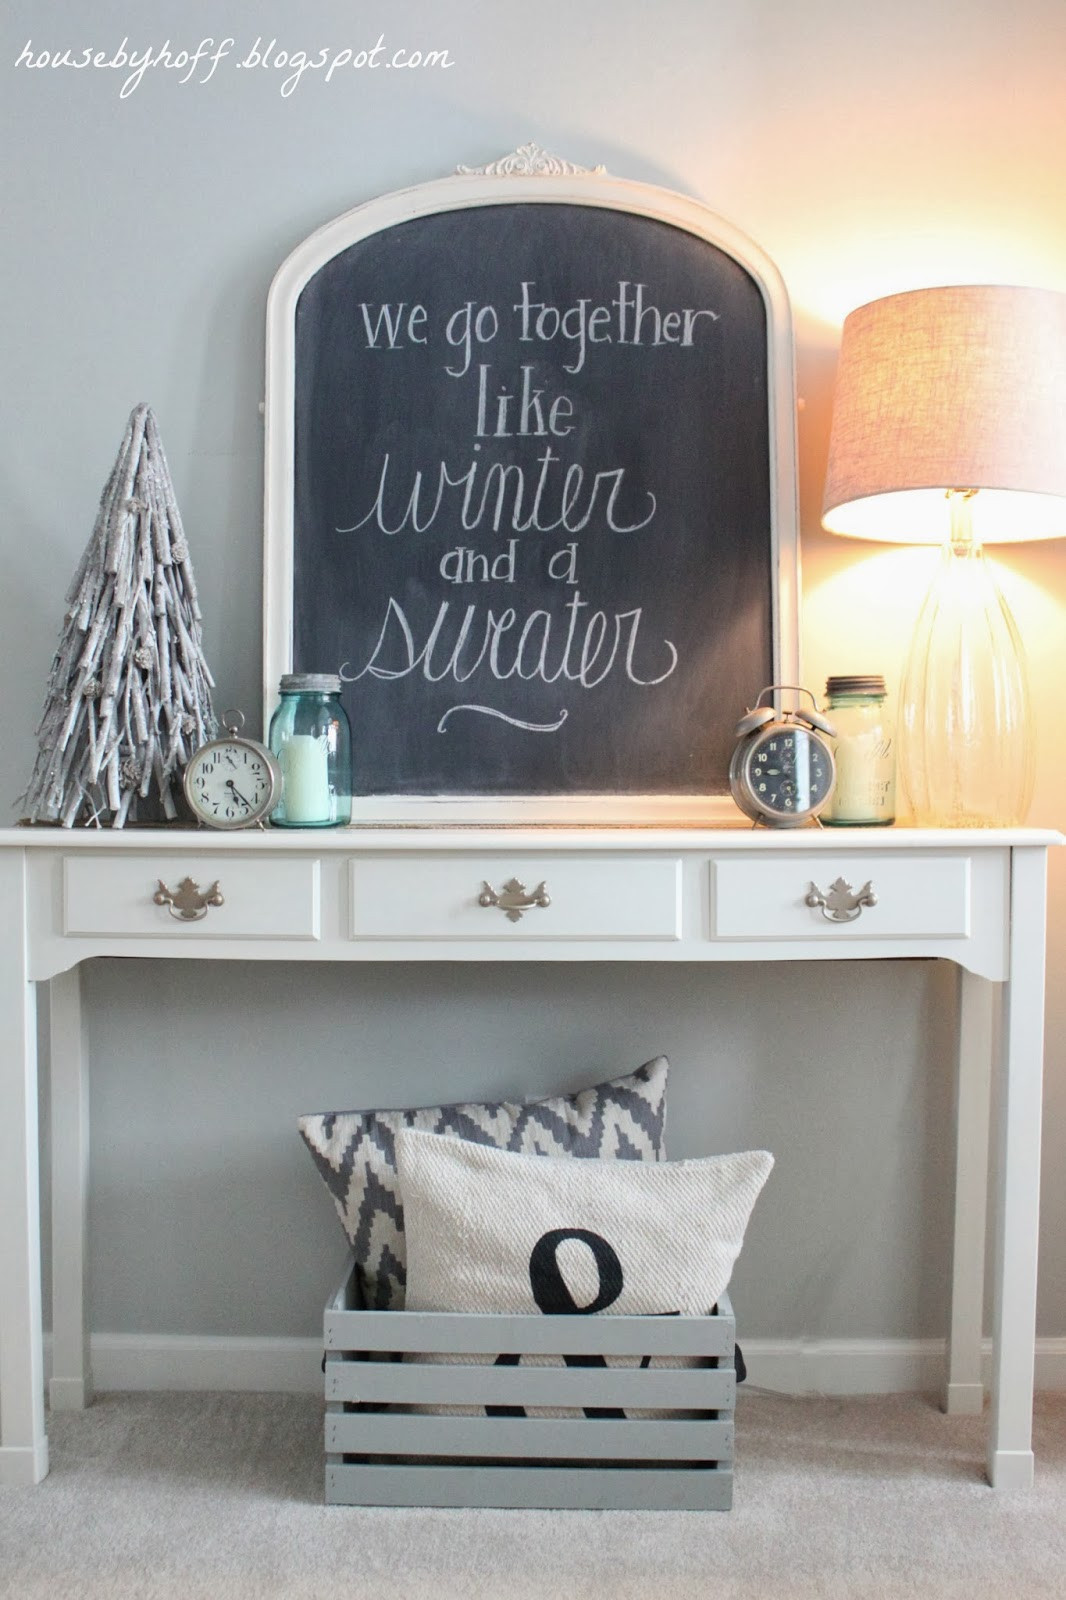 January Decorations Home
 Updated Home Tour January Decorating Recap House by Hoff